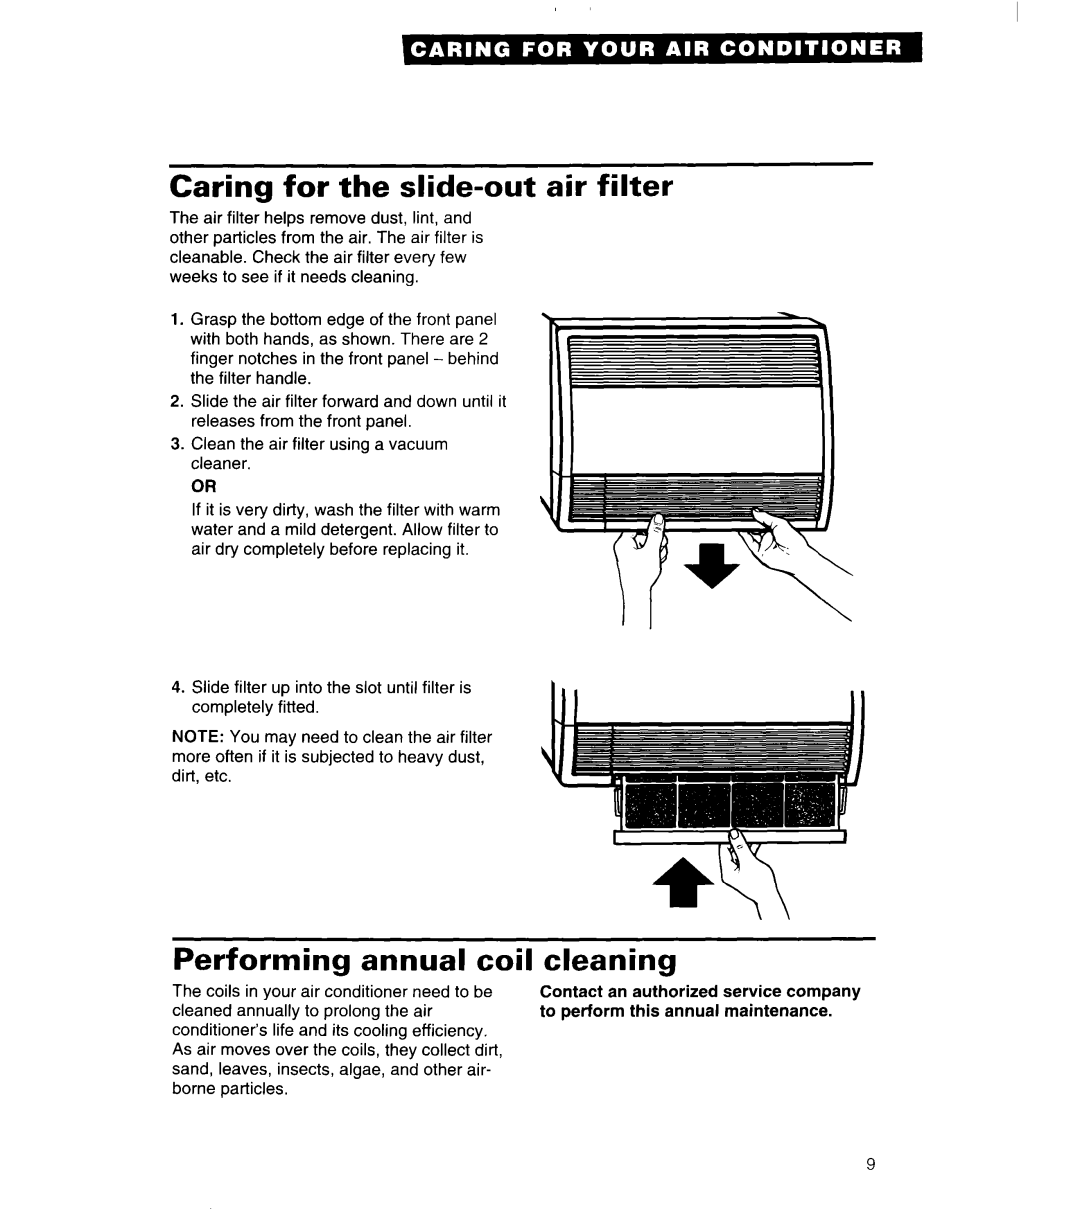 Whirlpool 3QACM07XD2 important safety instructions Caring for the slide-out, Performing annual coil, air filter cleaning 